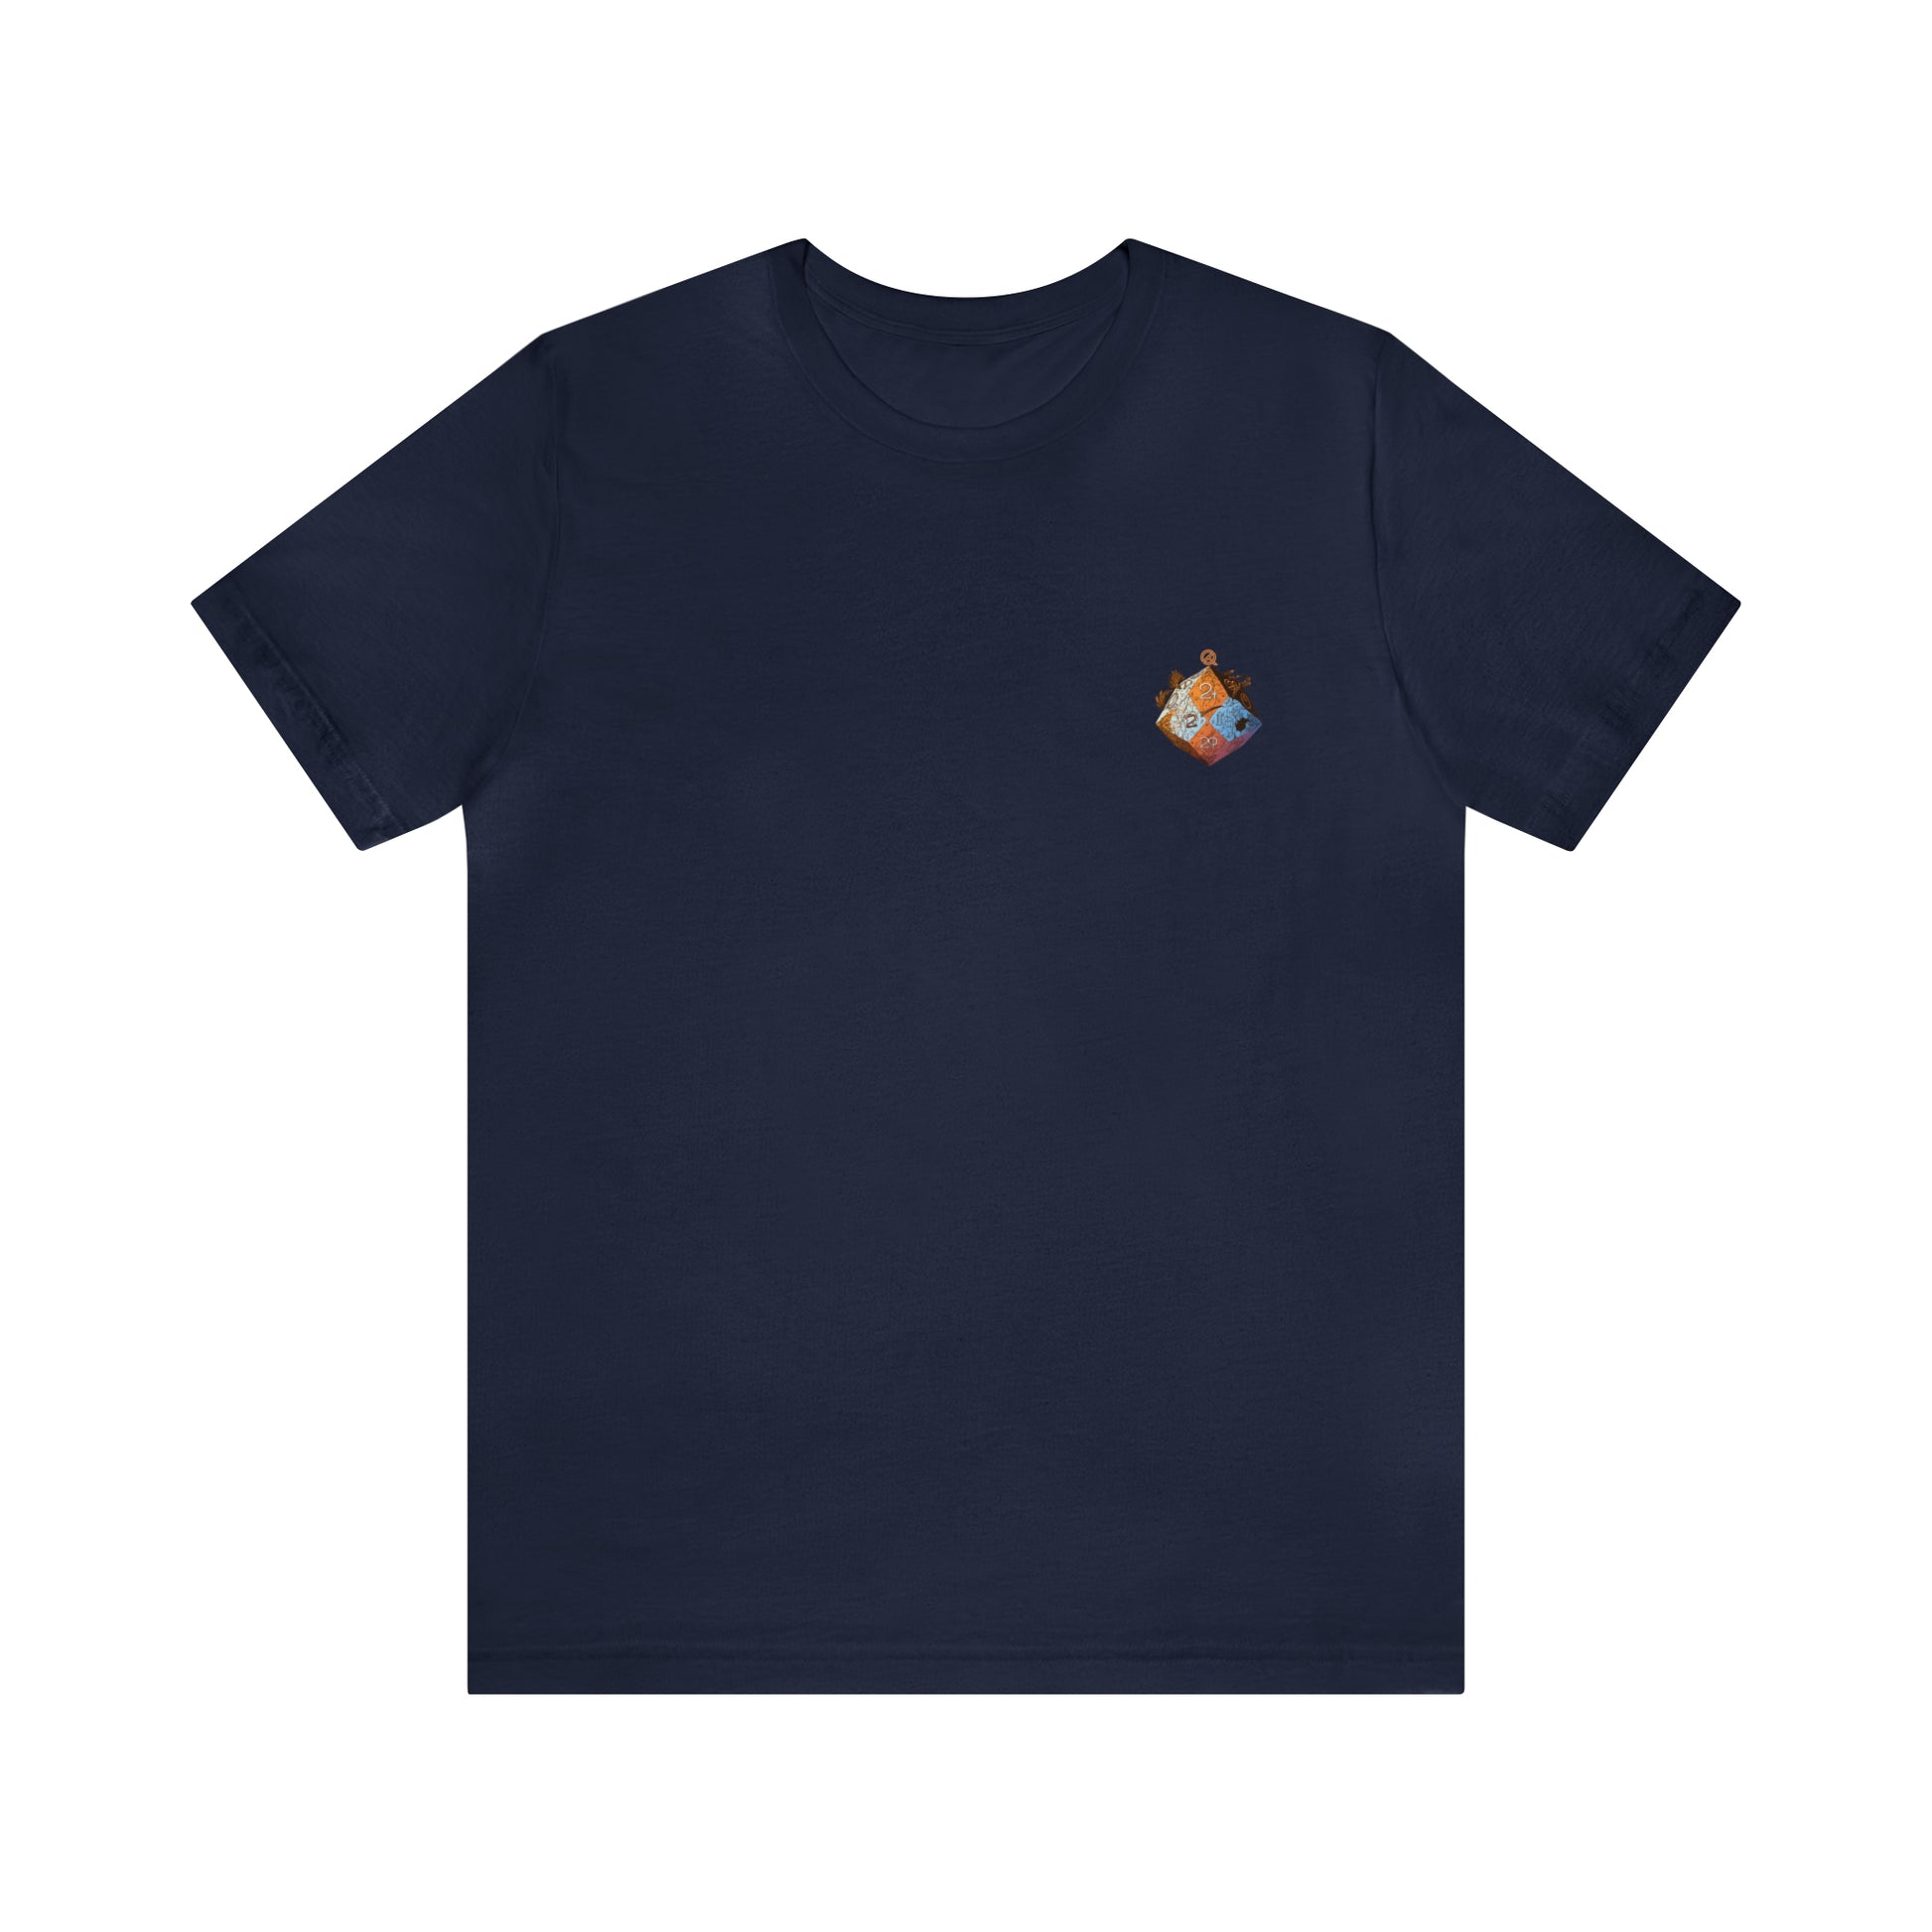 navy-quest-thread-tee-shirt-with-small-orange-blue-d20-dice-on-left-chest-of-shirt